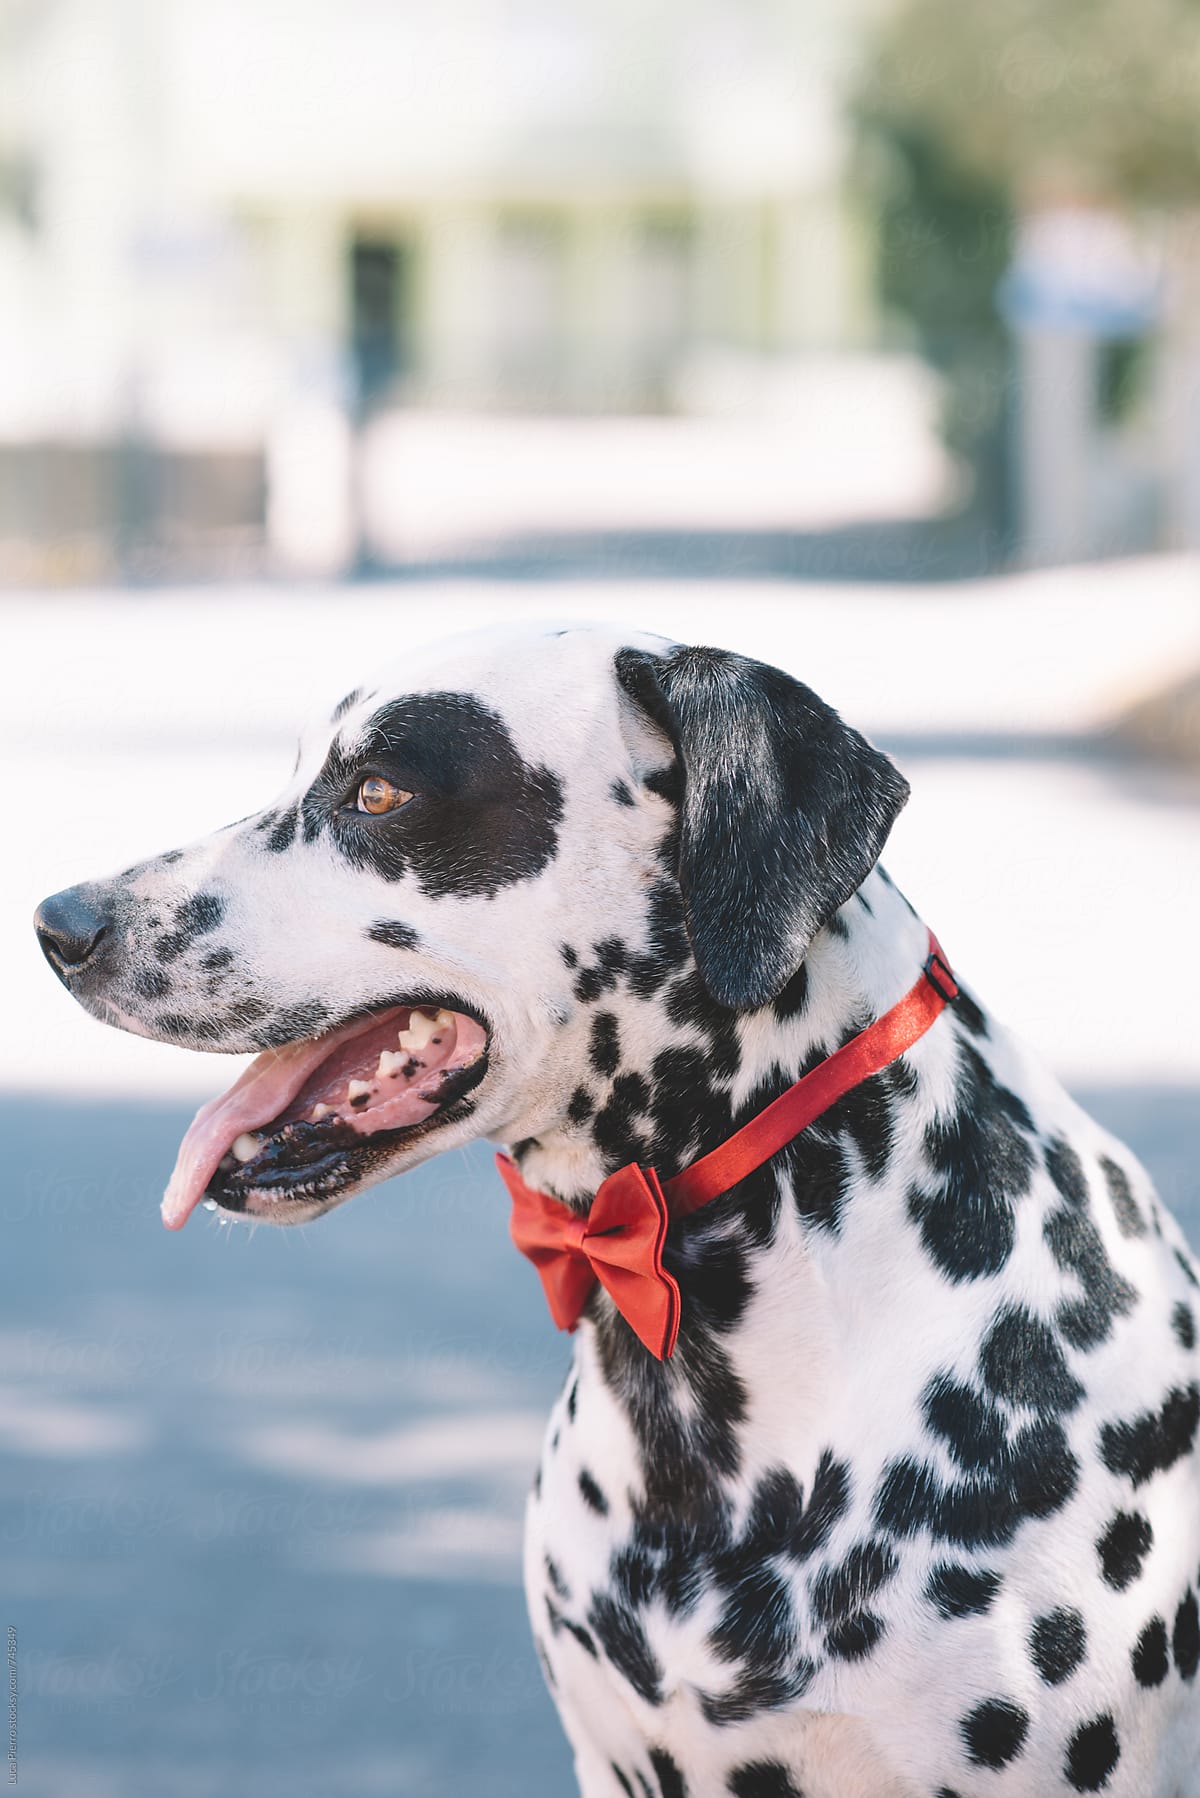 Profile of a dalmatian dog with a red bow